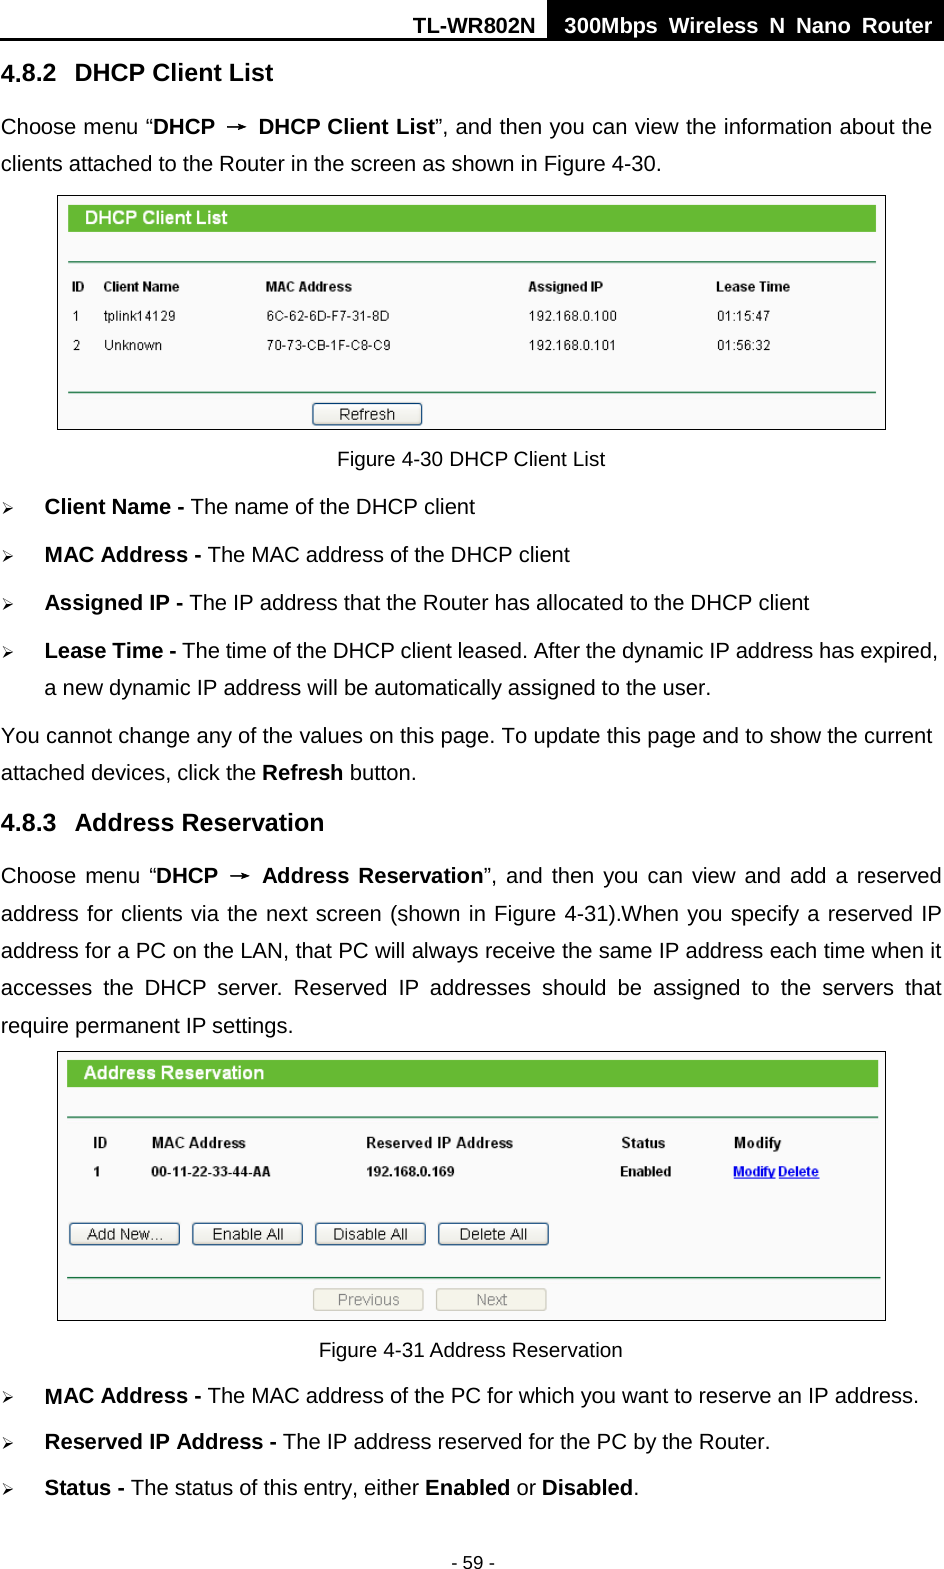 TL-WR802N  300Mbps Wireless N Nano Router  4.8.2 DHCP Client List Choose menu “DHCP  → DHCP Client List”, and then you can view the information about the clients attached to the Router in the screen as shown in Figure 4-30.  Figure 4-30 DHCP Client List  Client Name - The name of the DHCP client    MAC Address - The MAC address of the DHCP client    Assigned IP - The IP address that the Router has allocated to the DHCP client  Lease Time - The time of the DHCP client leased. After the dynamic IP address has expired, a new dynamic IP address will be automatically assigned to the user.     You cannot change any of the values on this page. To update this page and to show the current attached devices, click the Refresh button. 4.8.3 Address Reservation Choose menu “DHCP  → Address Reservation”, and then you can view and add a reserved address for clients via the next screen (shown in Figure 4-31).When you specify a reserved IP address for a PC on the LAN, that PC will always receive the same IP address each time when it accesses the DHCP server. Reserved IP addresses should be assigned to the  servers  that require permanent IP settings.    Figure 4-31 Address Reservation  MAC Address - The MAC address of the PC for which you want to reserve an IP address.  Reserved IP Address - The IP address reserved for the PC by the Router.  Status - The status of this entry, either Enabled or Disabled. - 59 - 